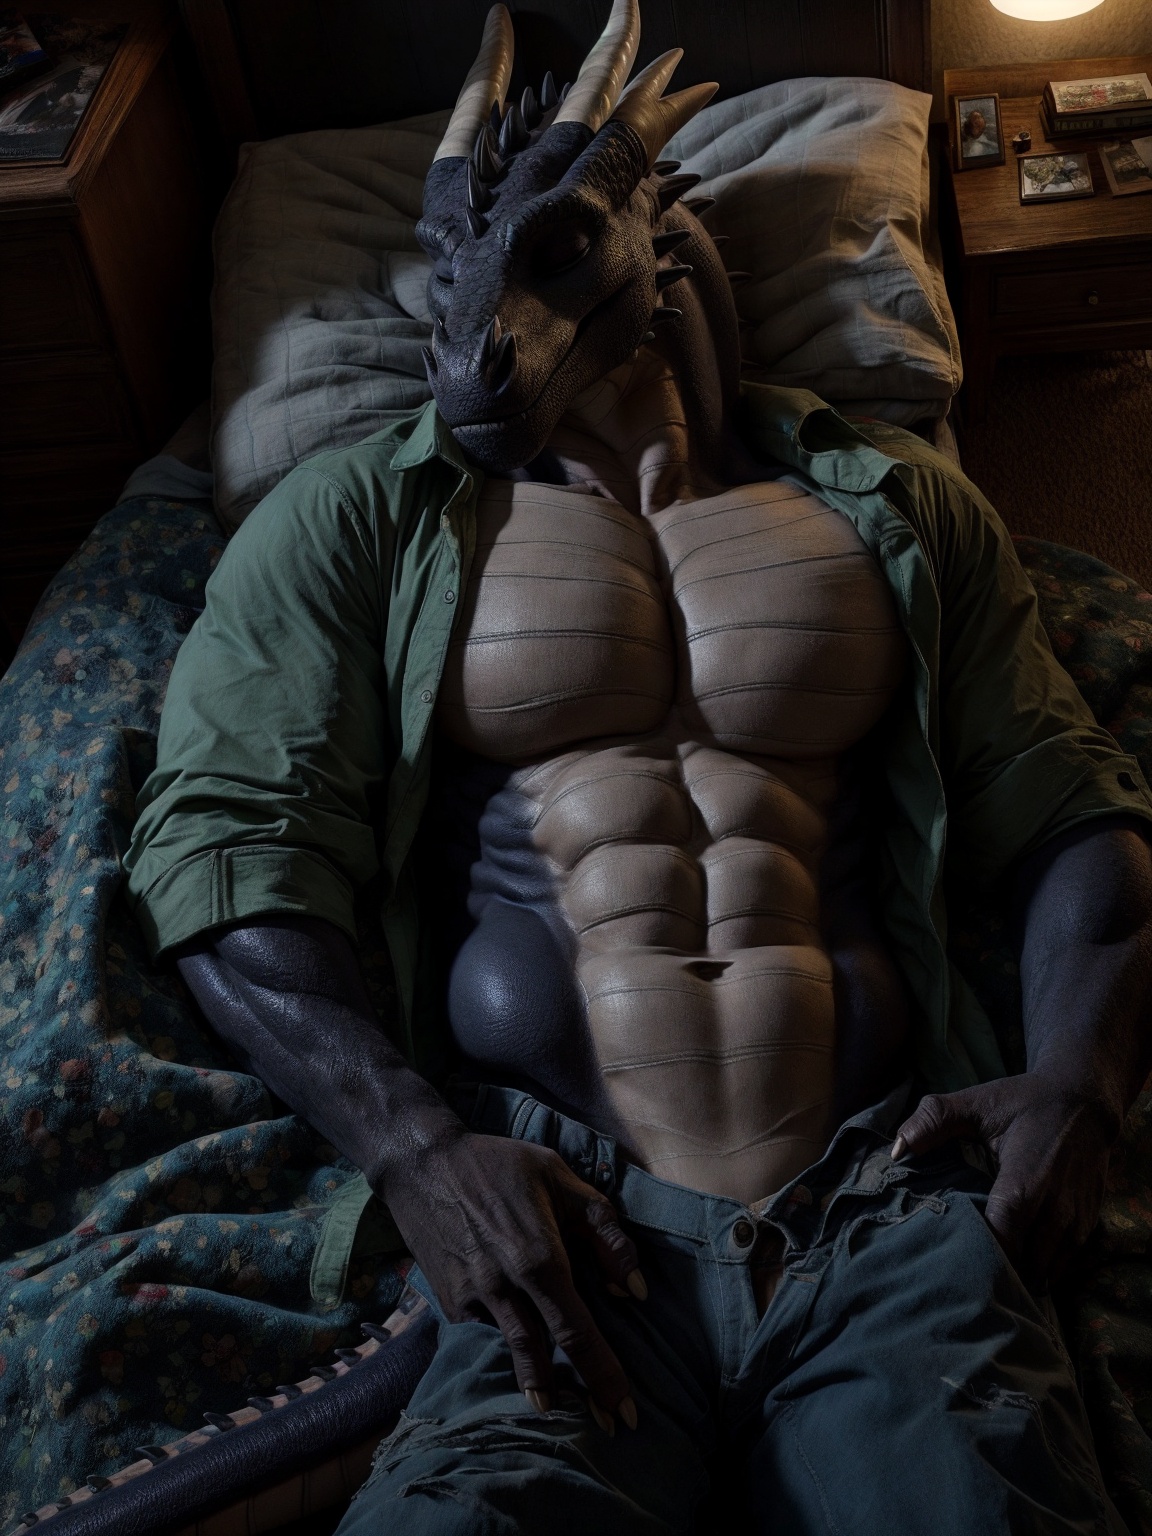 dragon, clothed, clothing, muscle, belly, open shirt, abs, laying down, head on pillow, bedroom, nightstand, dark, photorealism, photo, real, realism, high angle shot, asleep